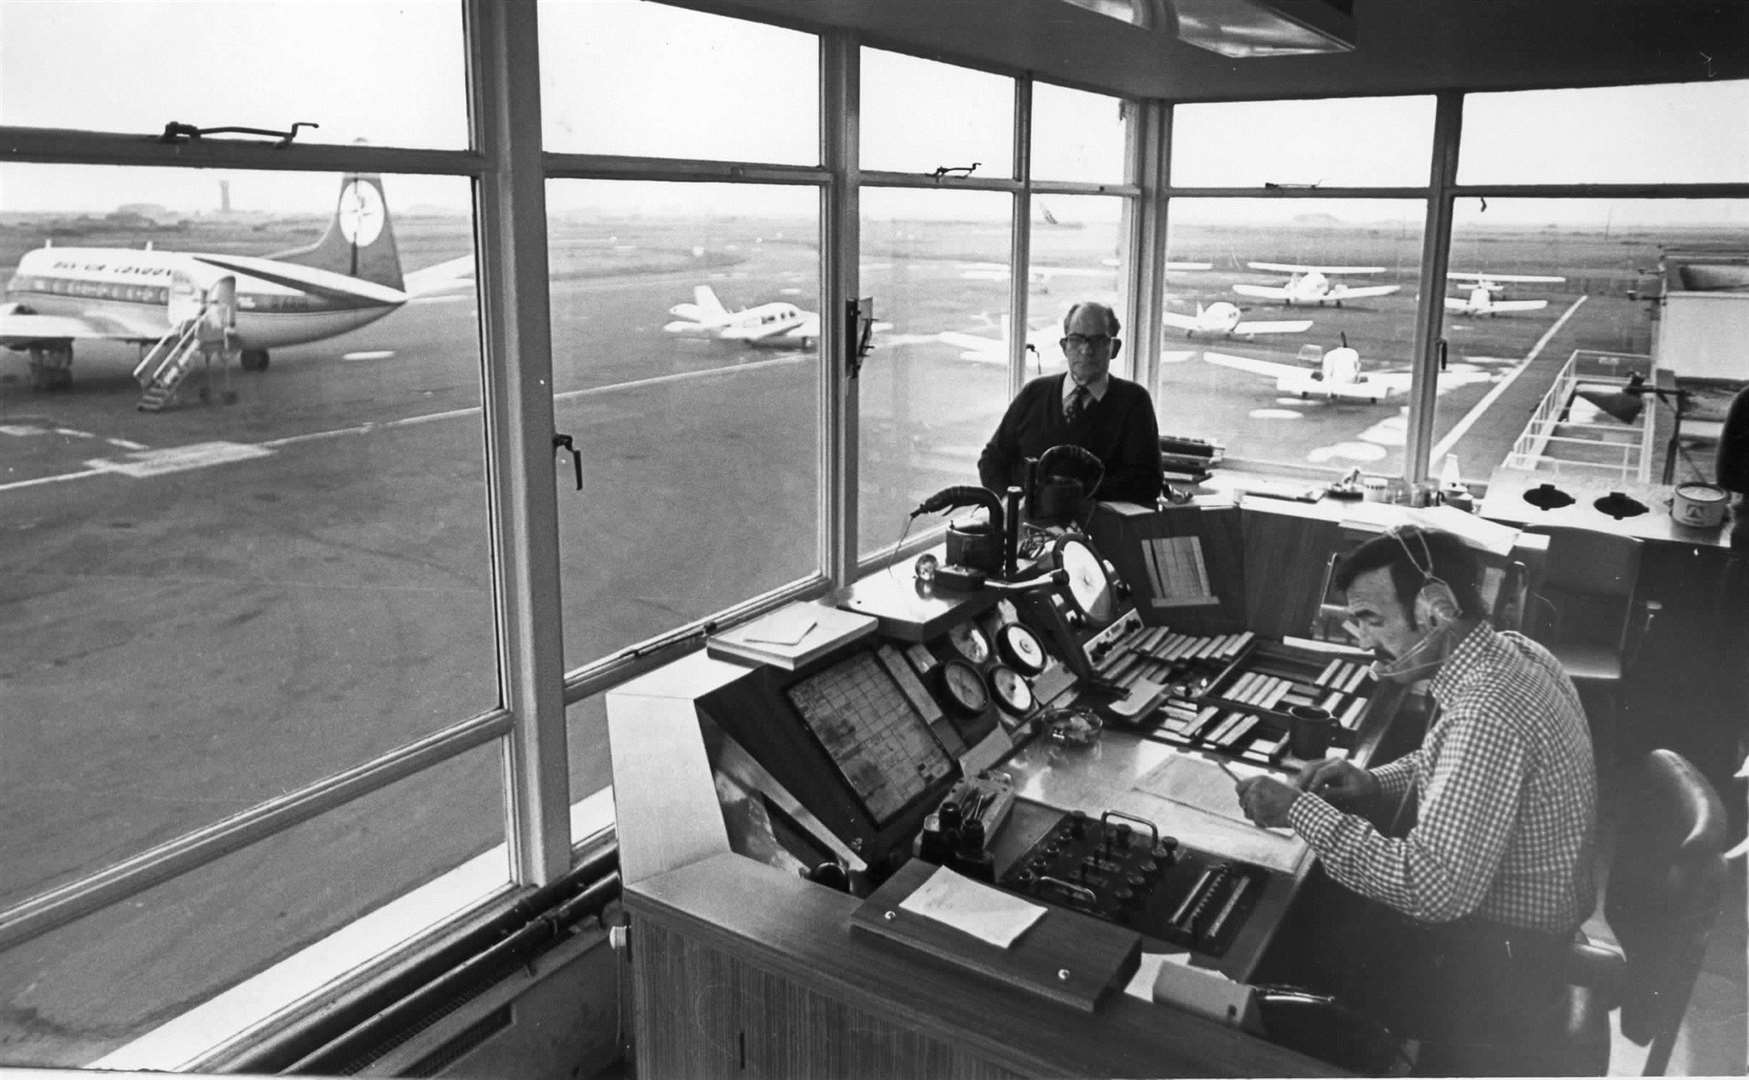 The air traffic control tower at Lydd in 1982